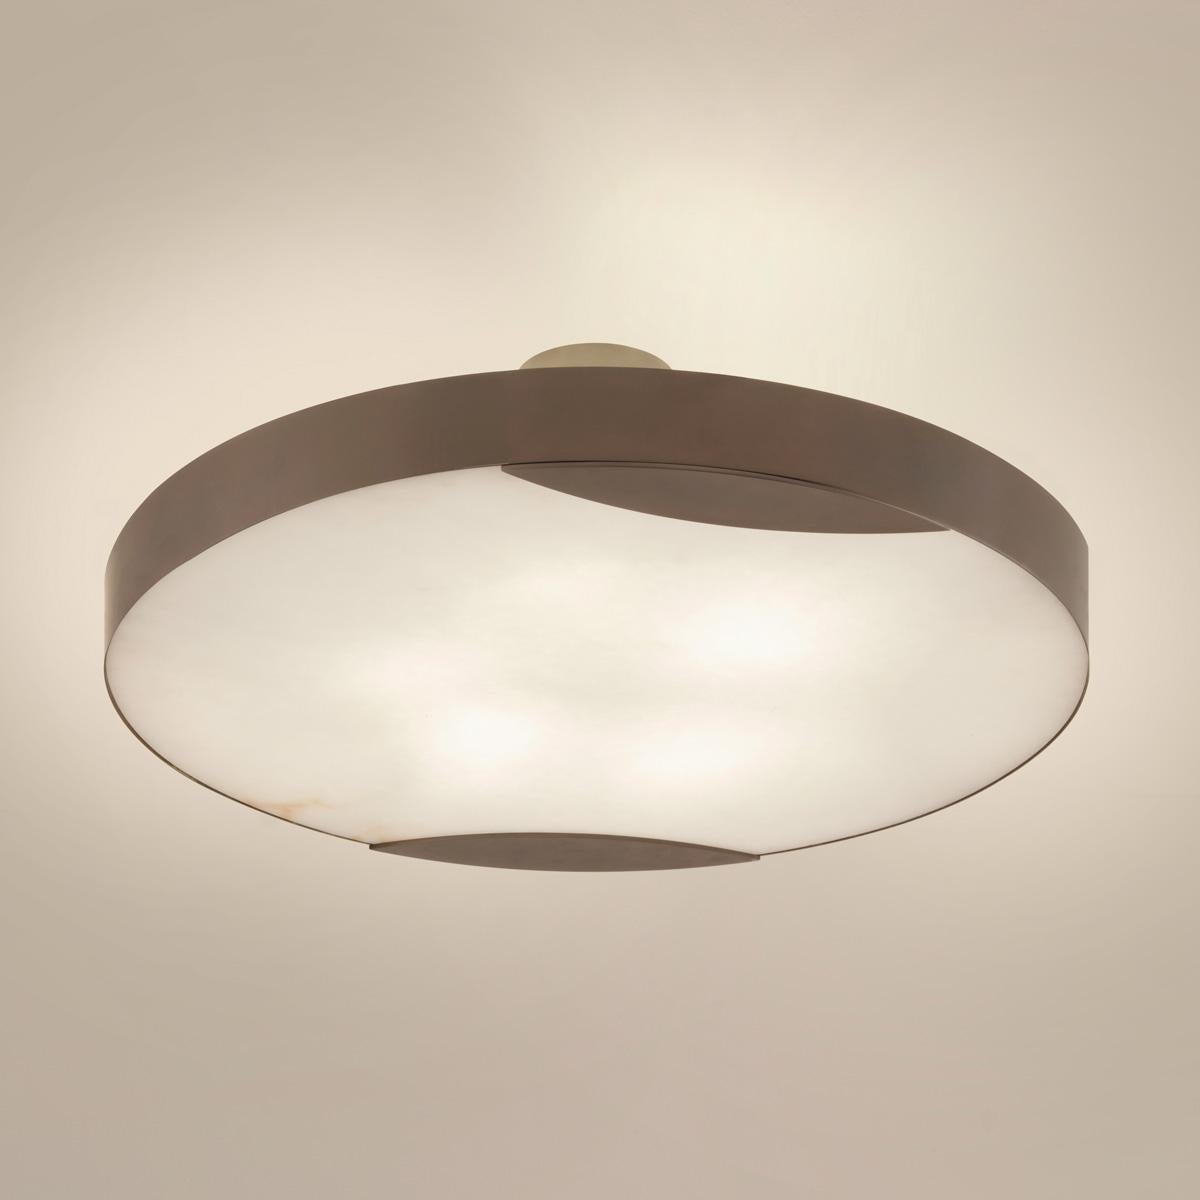 Cloud N.1 Ceiling Light by Gaspare Asaro-Bronze Finish For Sale 1